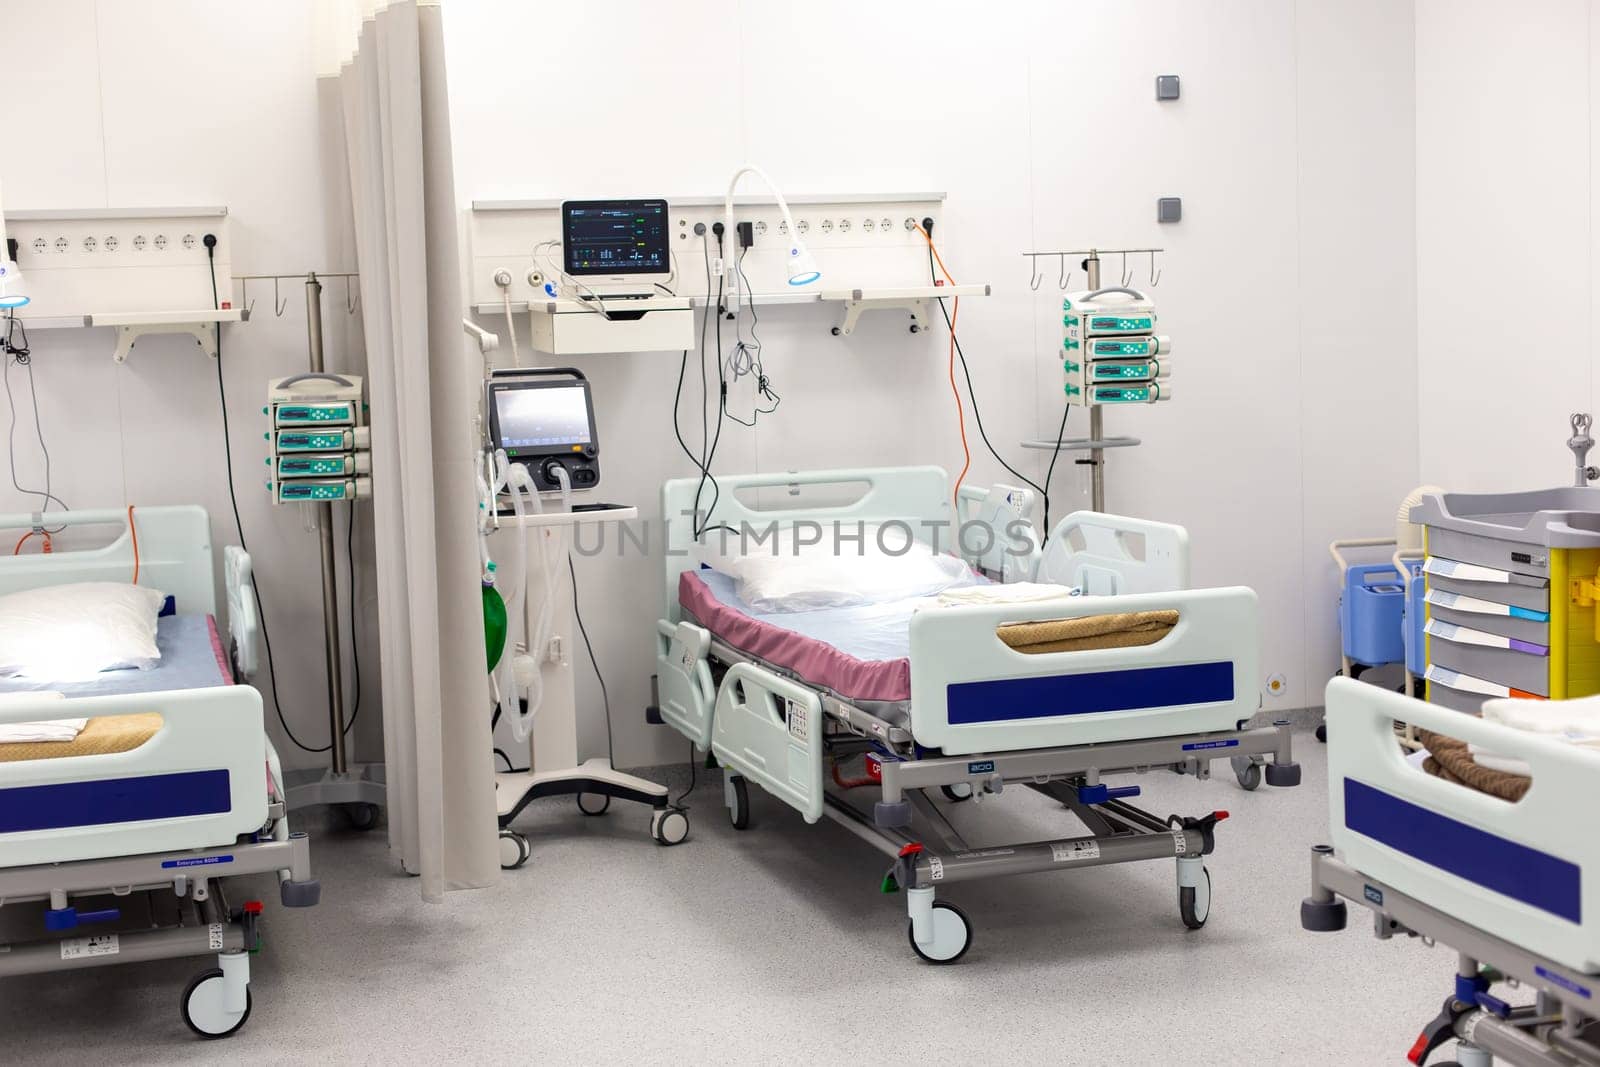 Moscow, Moscow region, Russia - 03.09.2023:View of a clean and organized hospital ward with patient beds and vital sign monitors